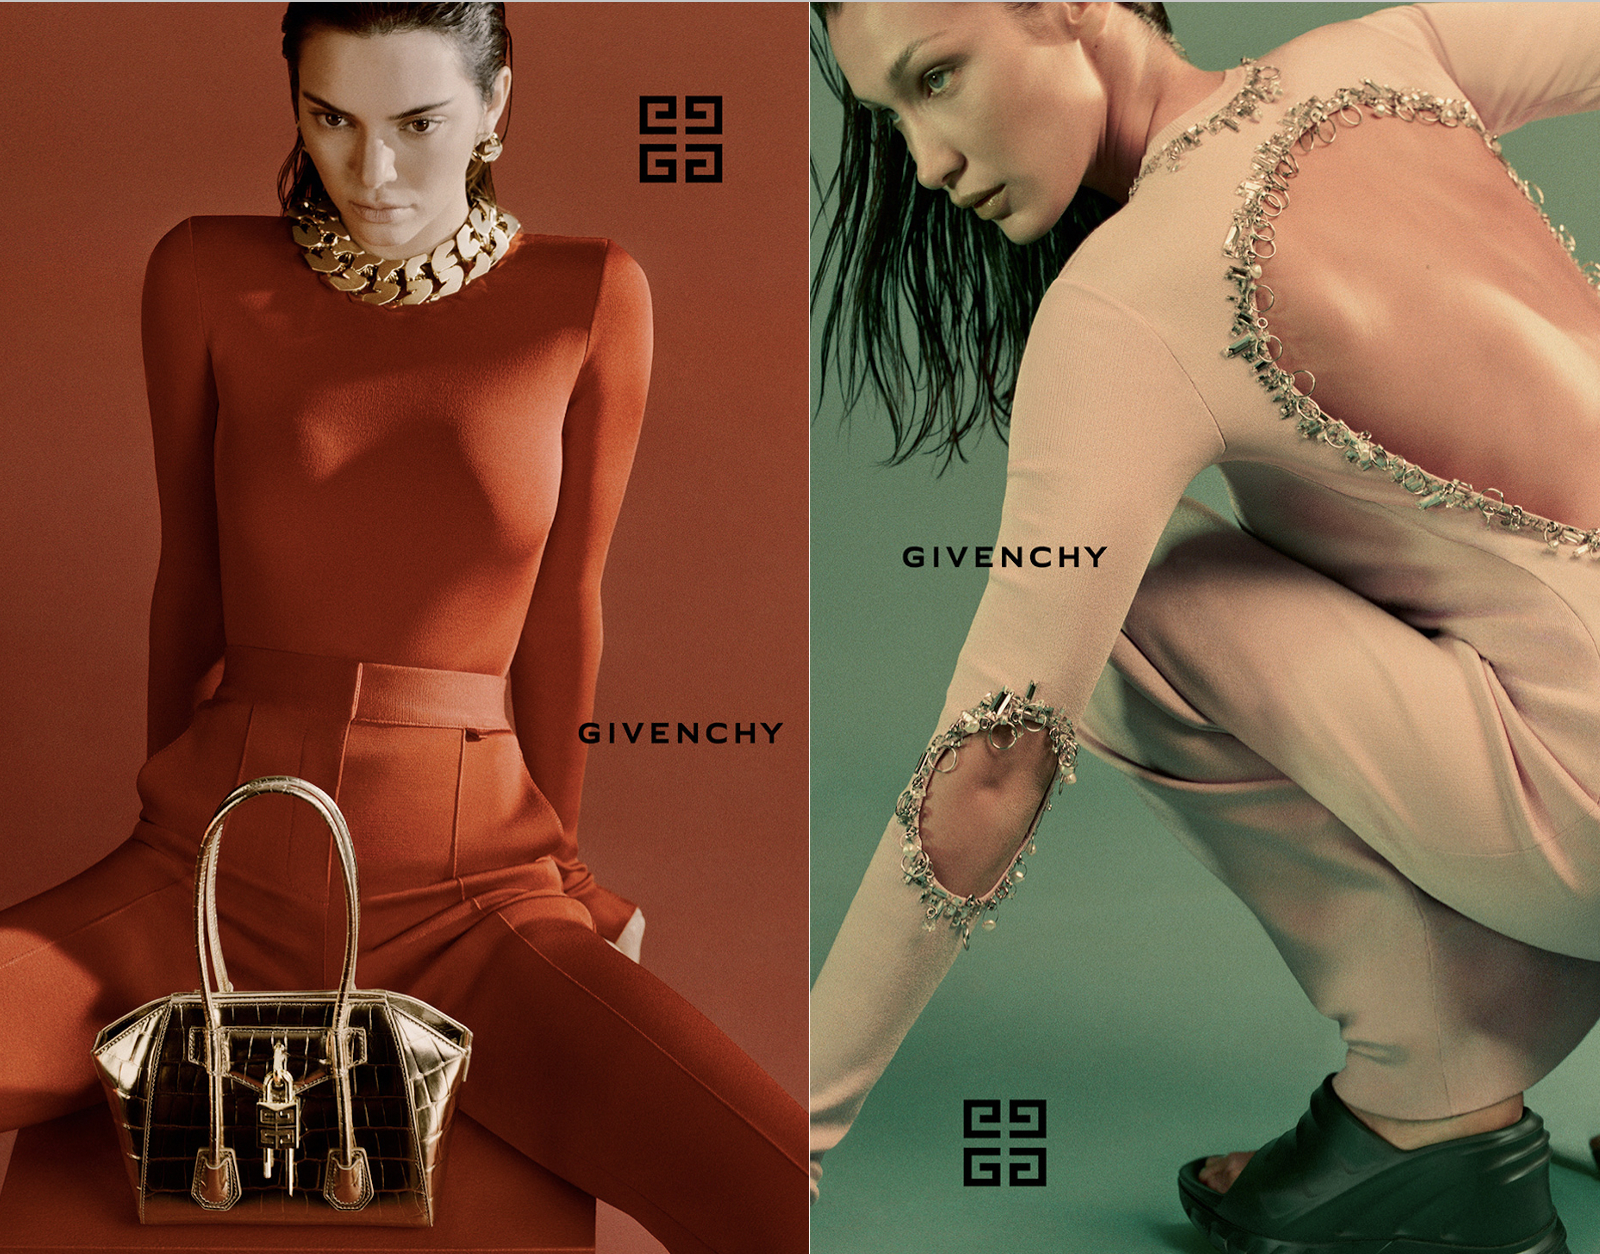 As Givenchy Campaign Stars Style Themselves, Questions of Authorship and  Ownership Abound - The Fashion Law